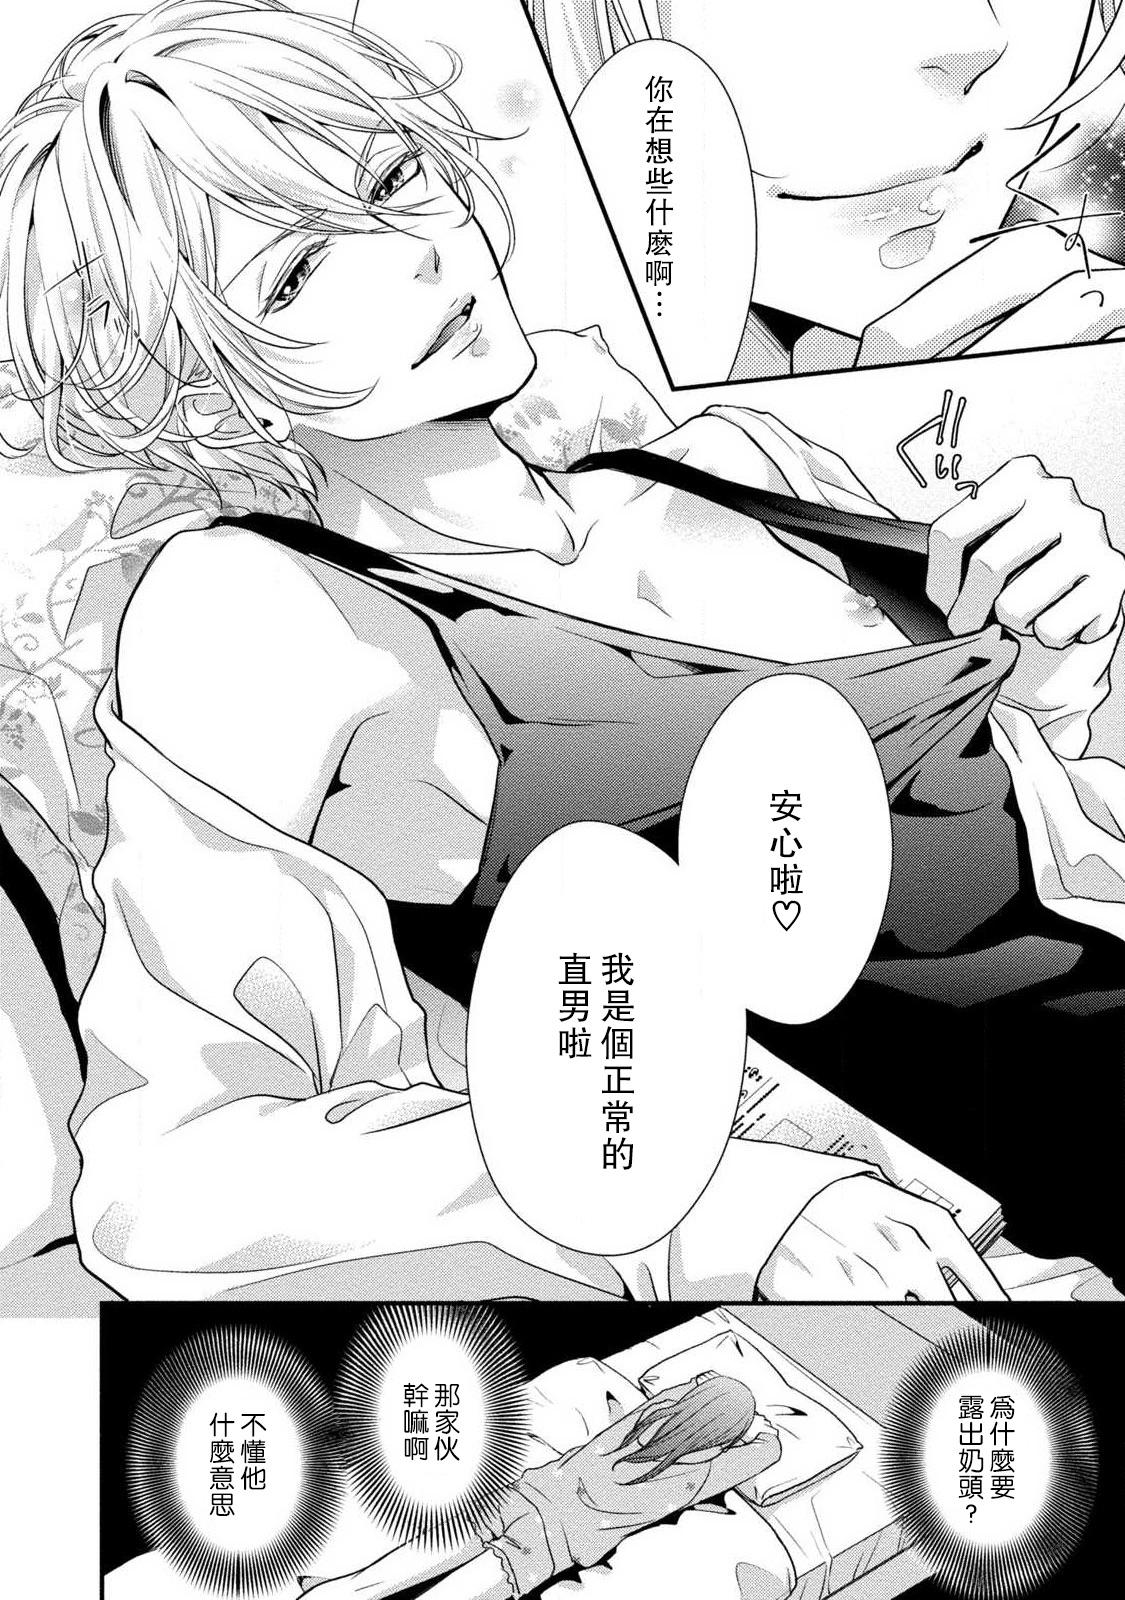 Teensex If my brother's friend was a male of exposure | 哥哥的朋友是露出系男子 Anal Licking - Page 10